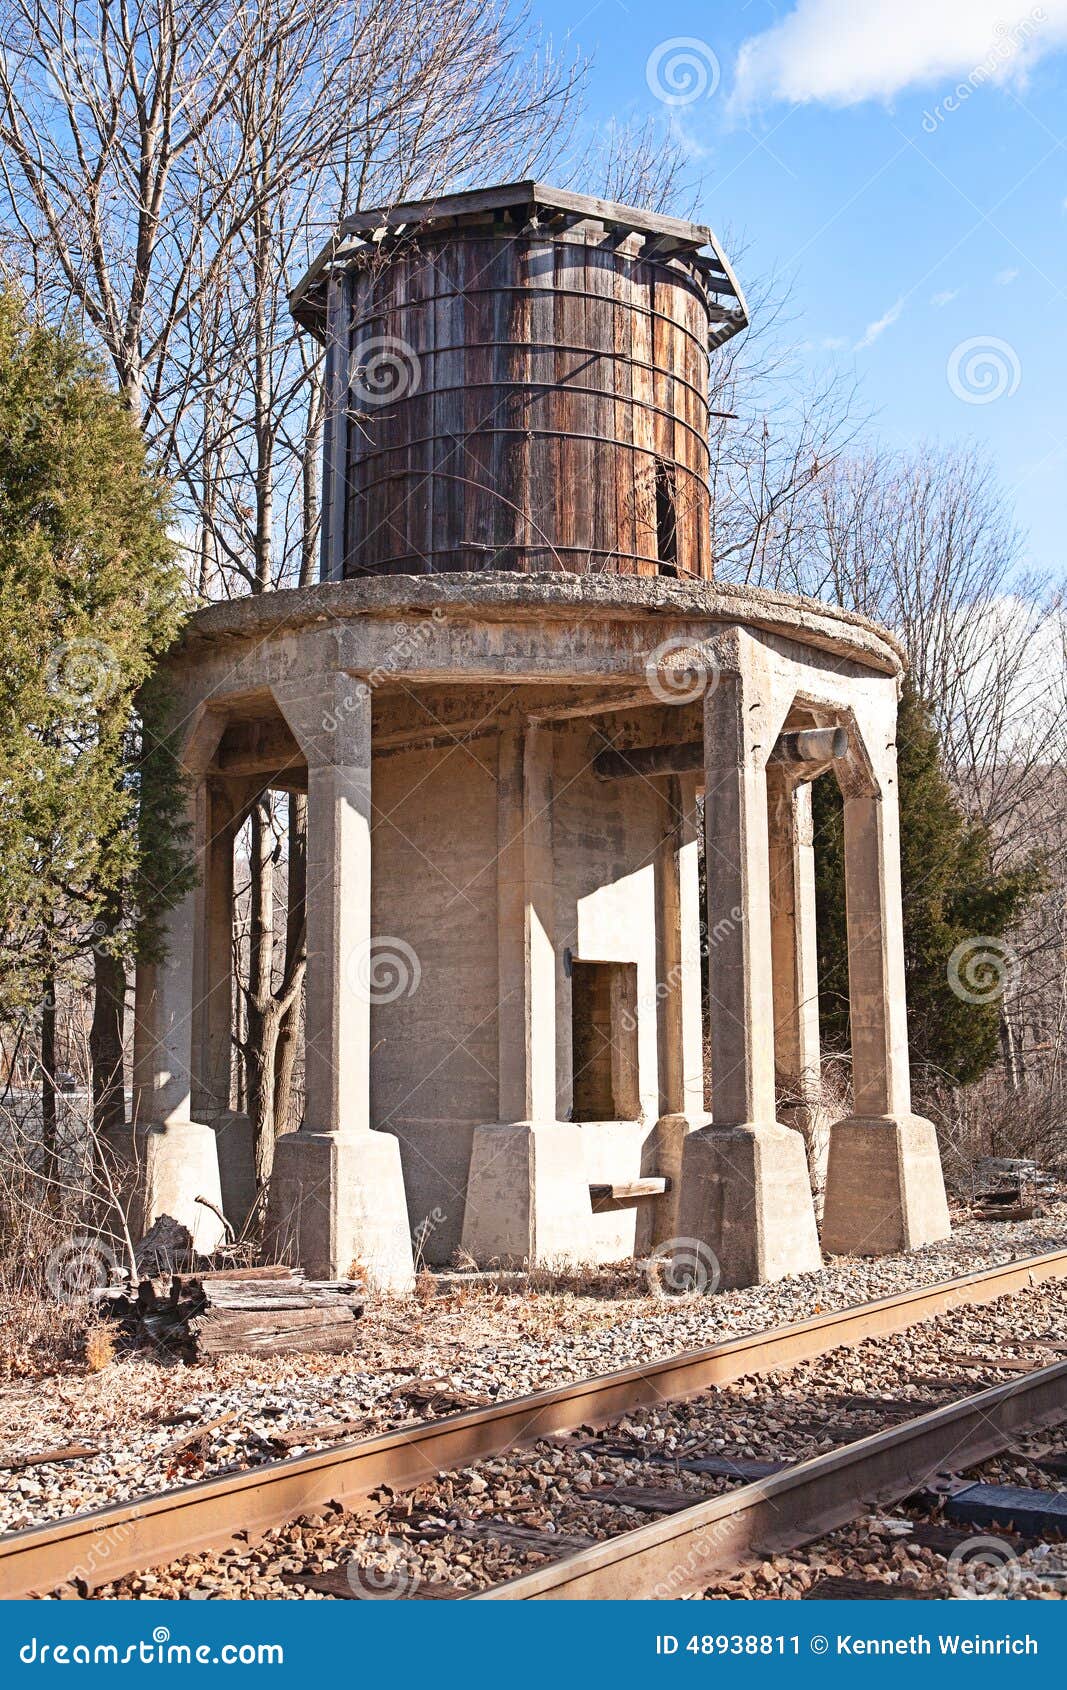 Abandoned Railroad Water Tower Stock Photo - Image: 48938811